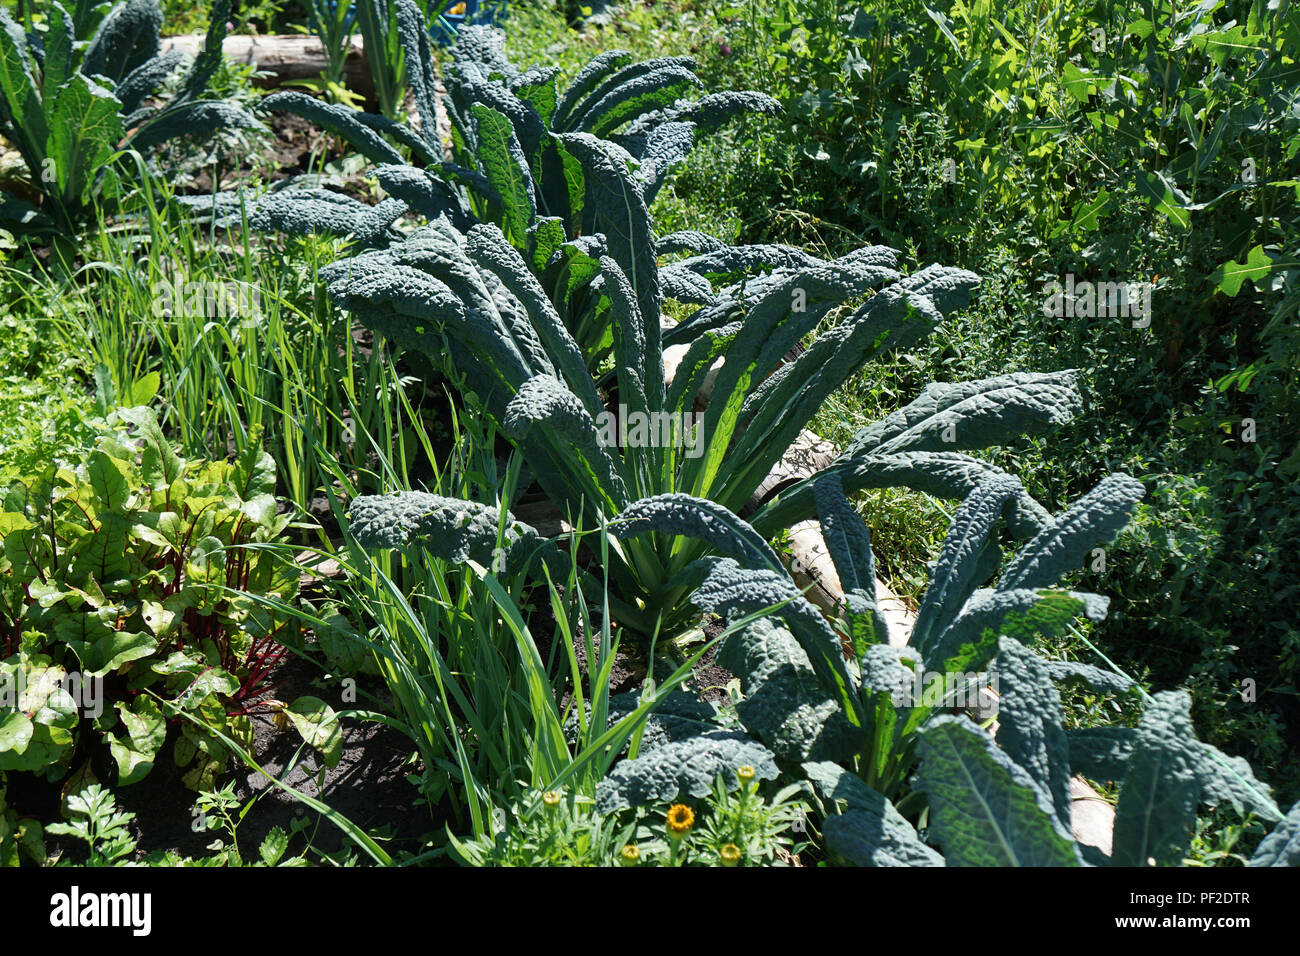 Kale cabbage. Tuscan kale or black kale on plant. Winter cabbage also known as italian kale or lacinato growth in row. Ogranic cabbage mediterranean g Stock Photo